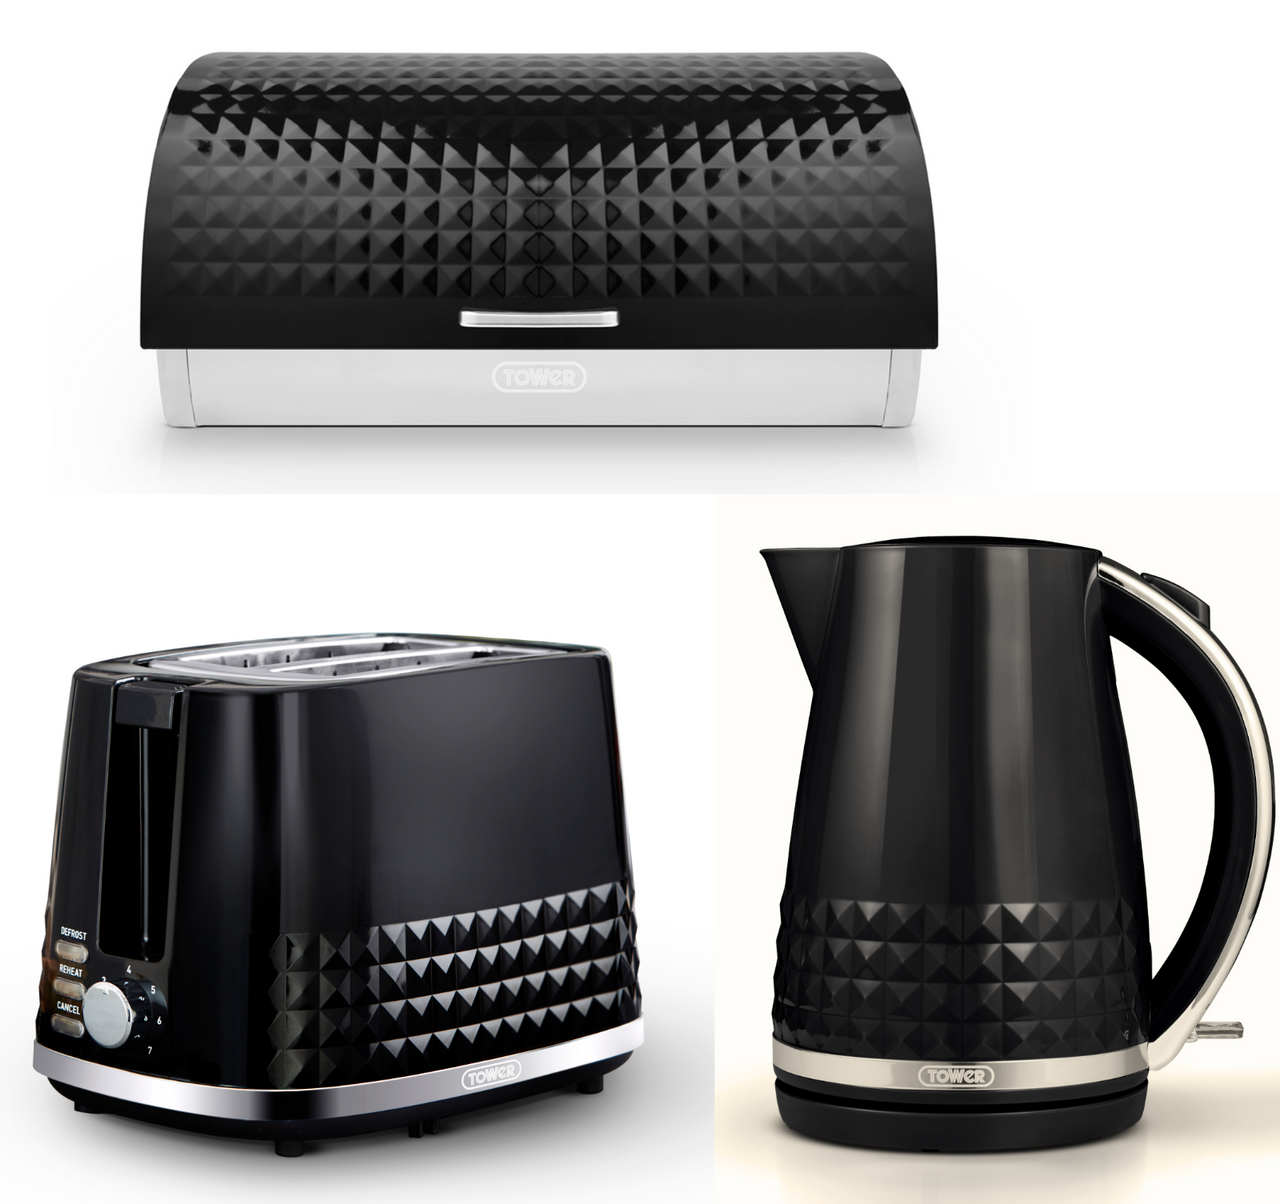 Tower Solitaire Jug Kettle, 2 Slice Toaster & Bread Bin in Black & Chrome Matching Set